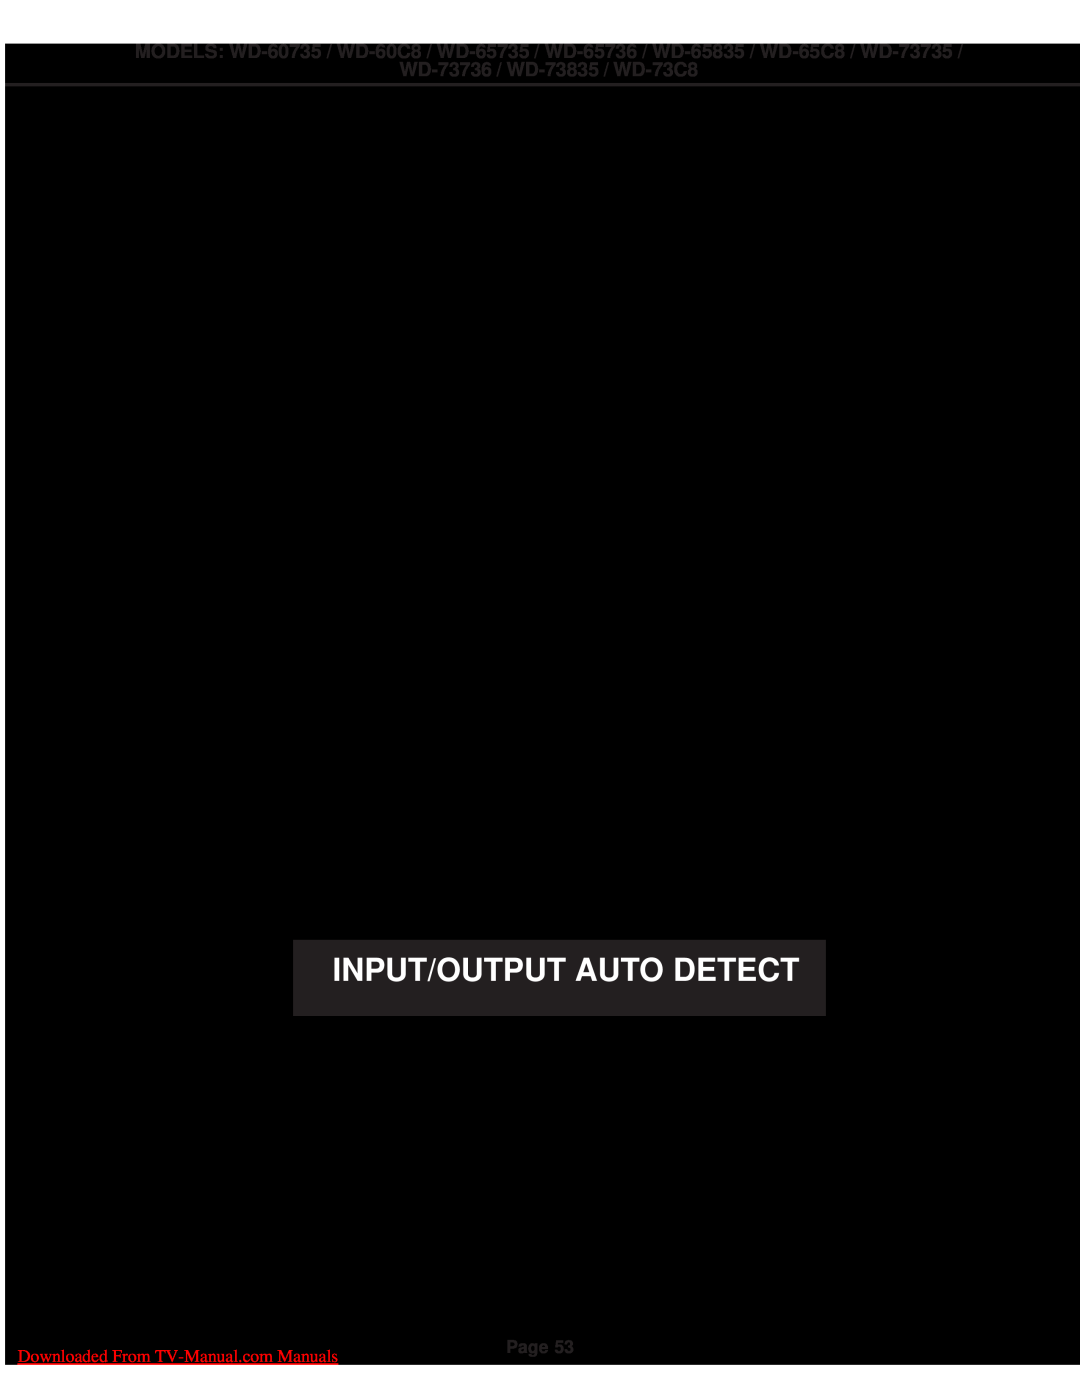 Mitsubishi Electronics Input/Output Auto Detect, WD-73736 / WD-73835 / WD-73C8, Downloaded From TV-Manual.com Manuals 